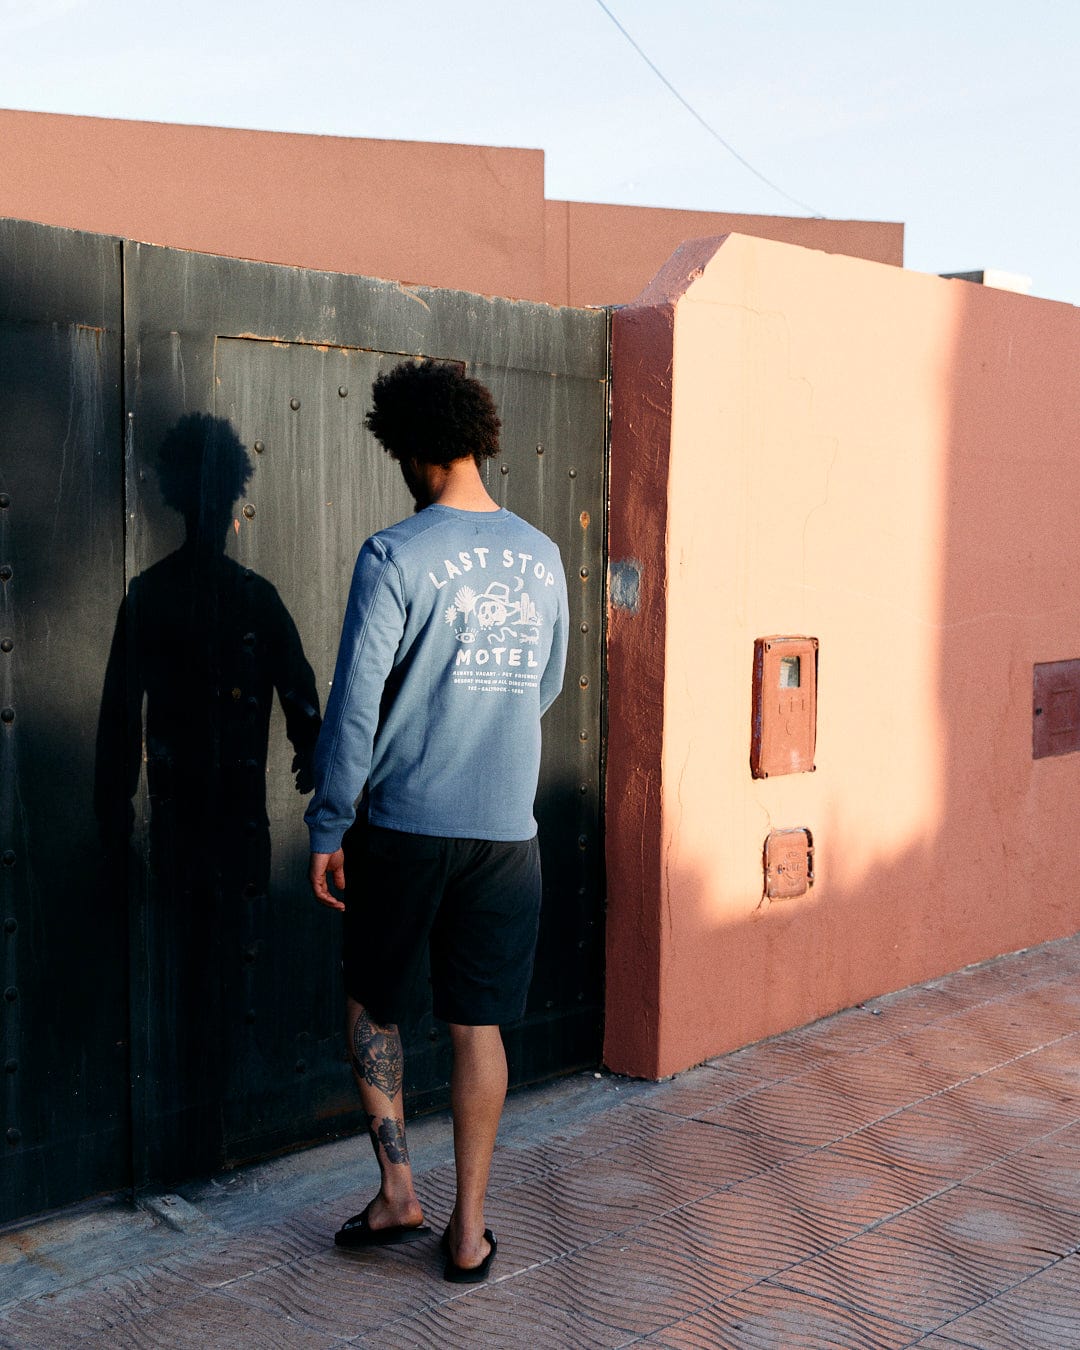 A person with curly hair wears a Saltrock Last Stop Motel - Recycled Mens Sweatshirt in Blue and stands next to a rustic green door on a peach-colored wall, casting a shadow.